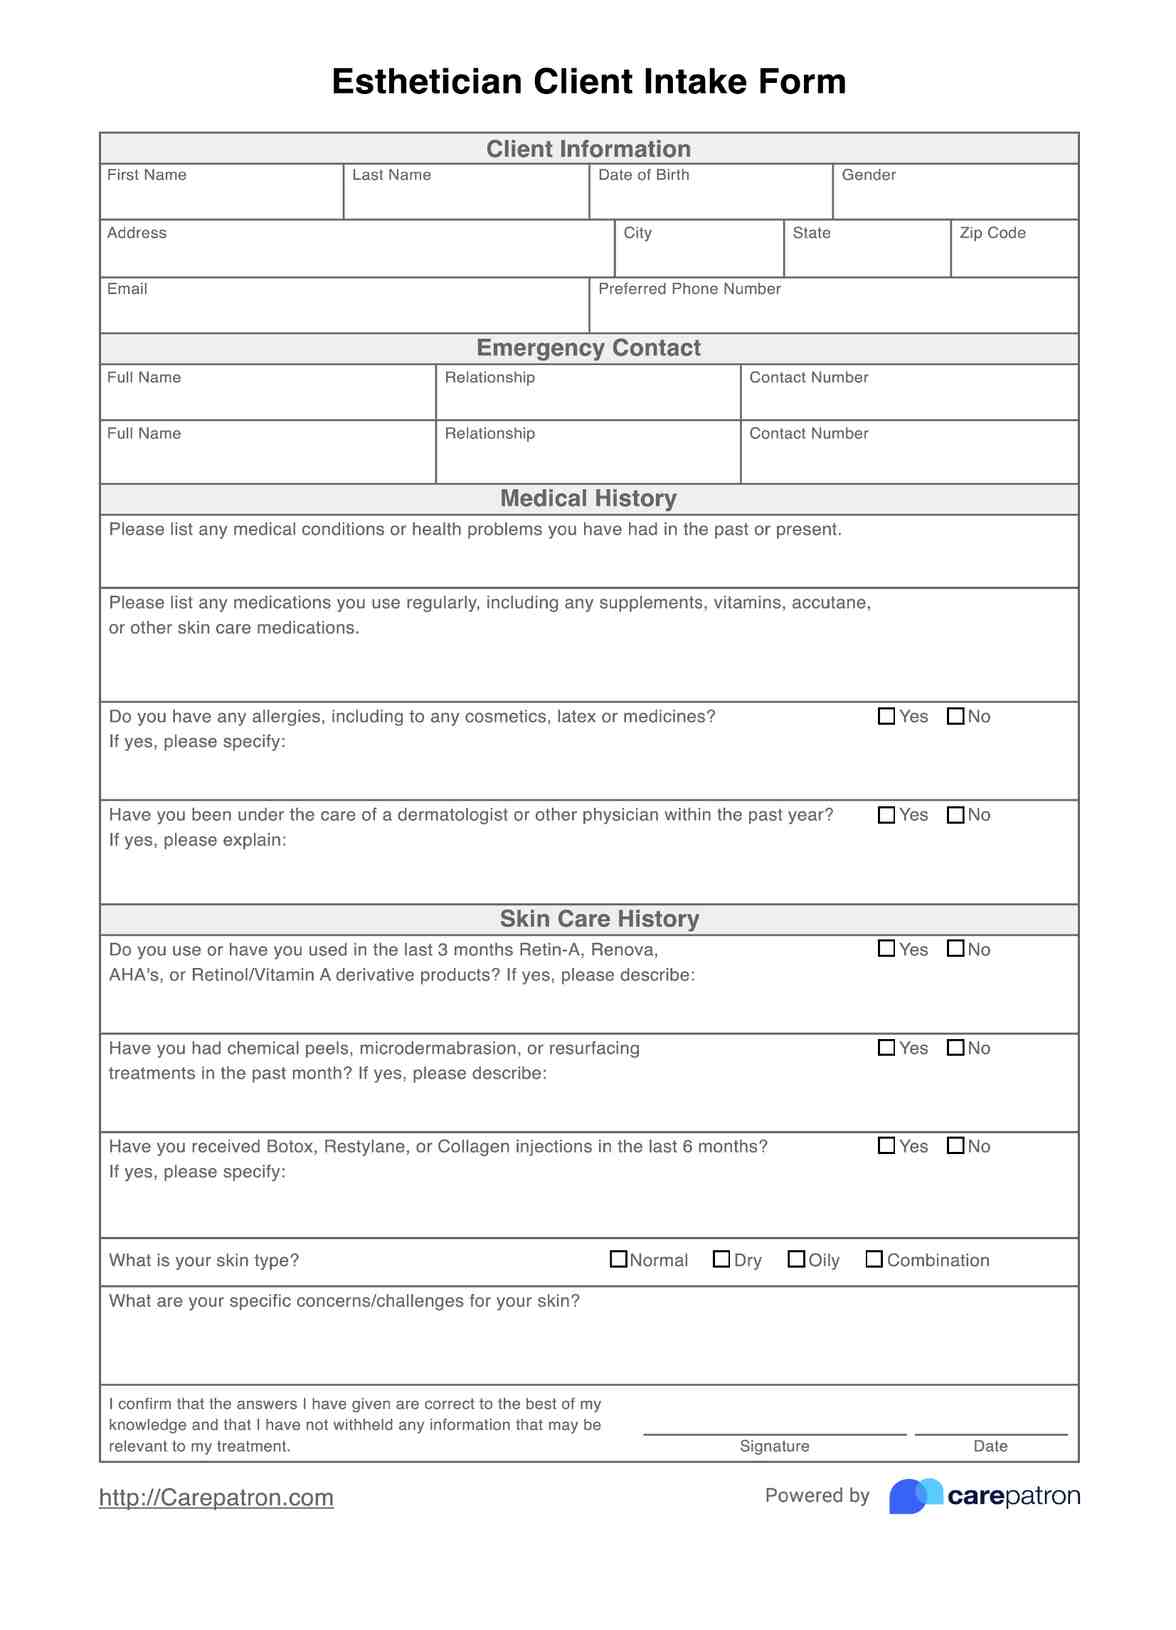 Esthetician Client Intake Form PDF Example